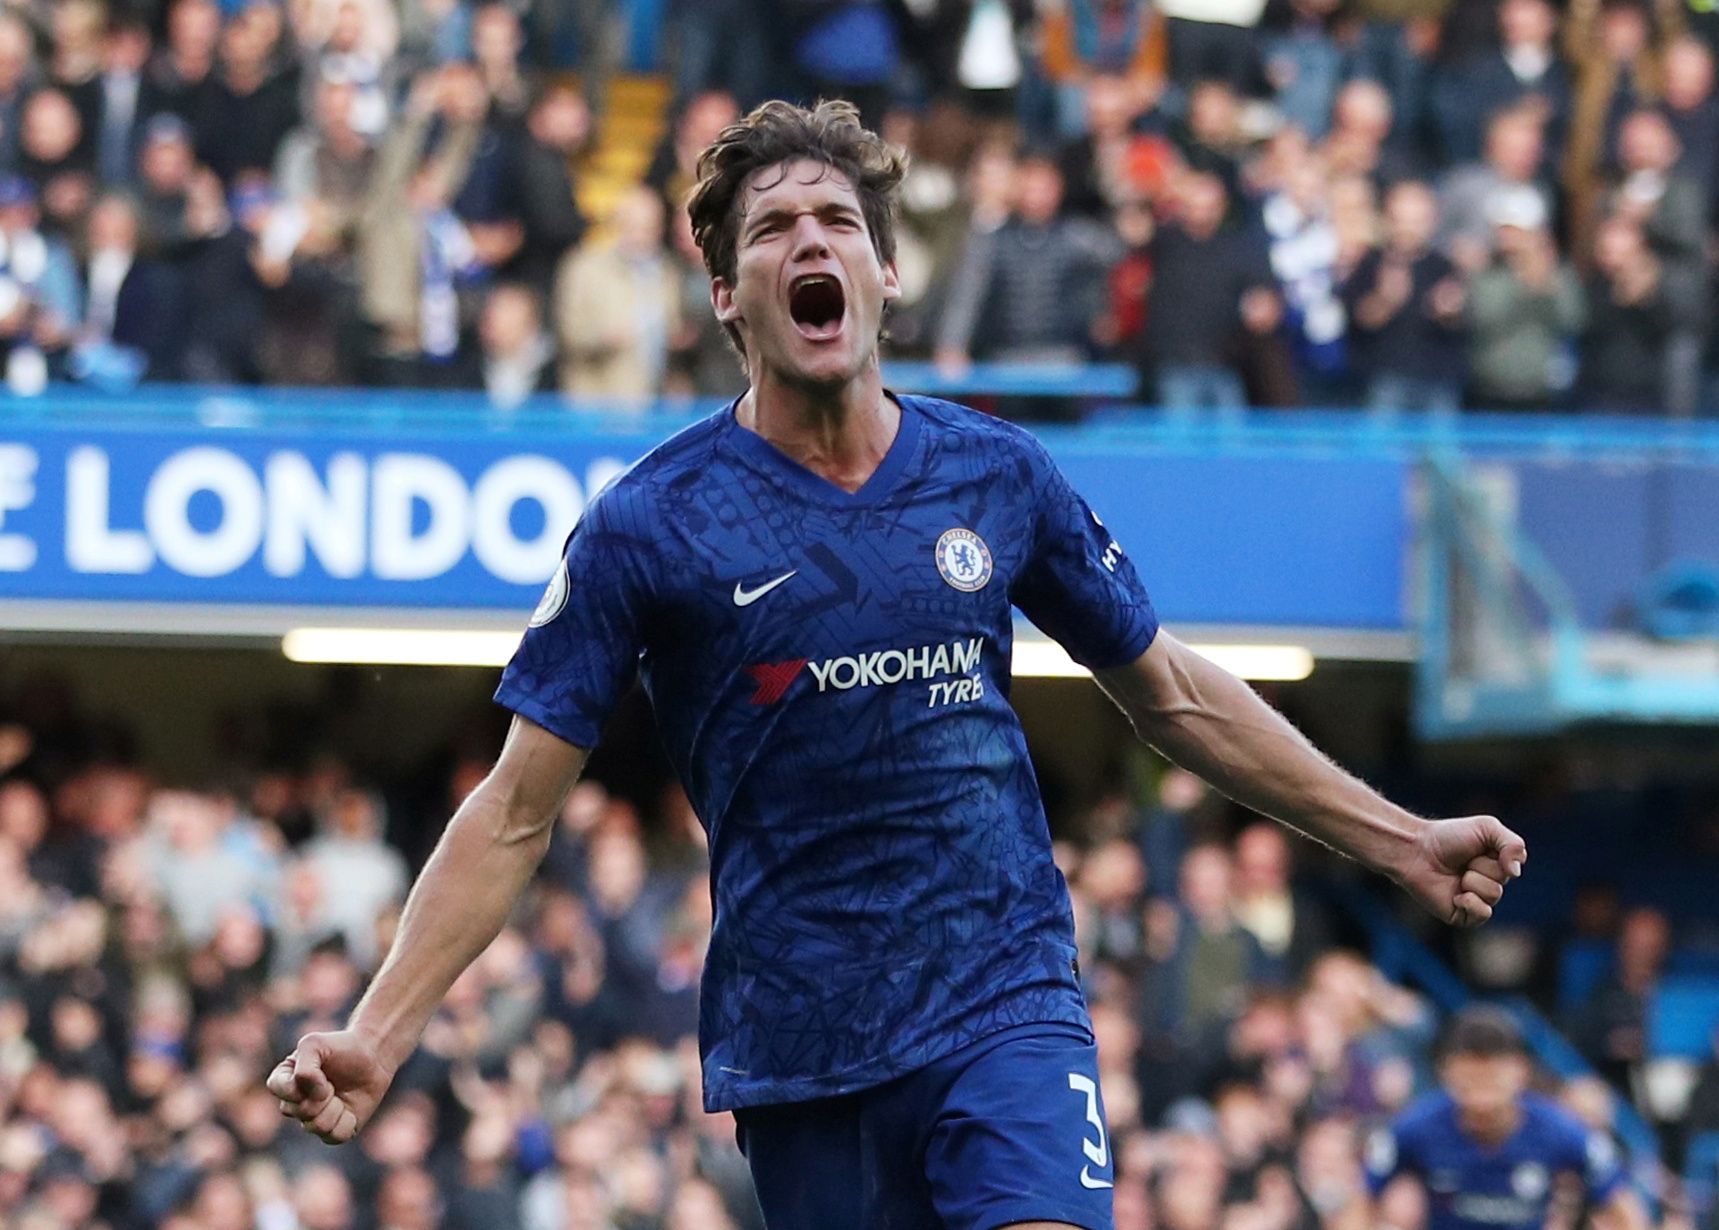 Soccer Football - Premier League - Chelsea v Newcastle United - Stamford Bridge, London, Britain - October 19, 2019  Chelsea's Marcos Alonso celebrates scoring their first goal        REUTERS/Hannah McKay  EDITORIAL USE ONLY. No use with unauthorized audio, video, data, fixture lists, club/league logos or 